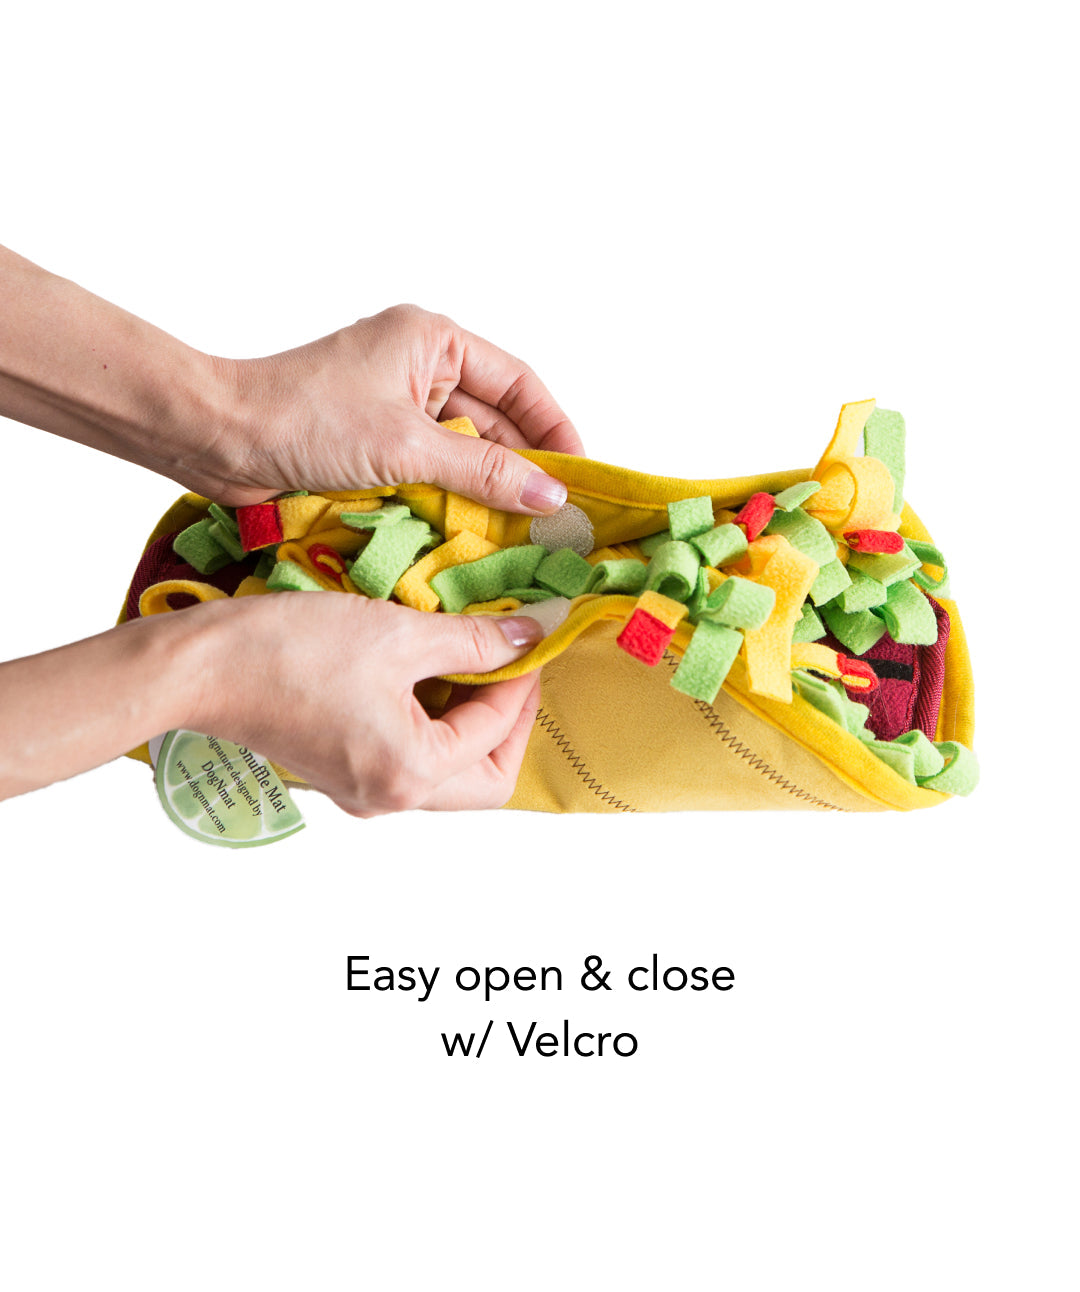 Taco Snuffle Mat Puzzle Toys Rover 